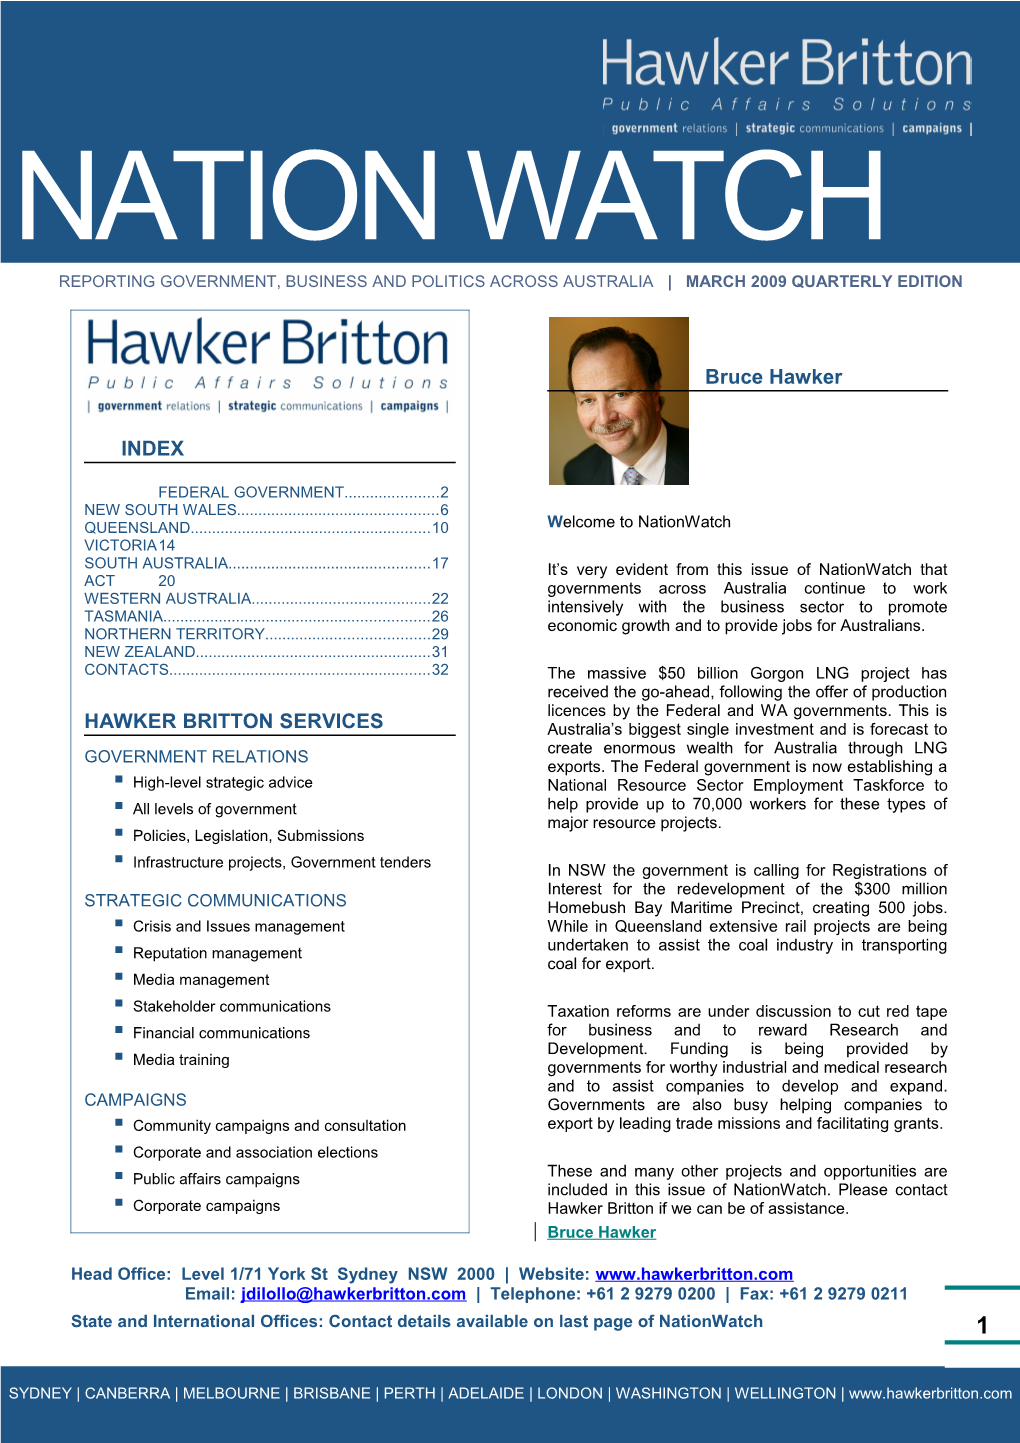 Welcome to Nationwatch